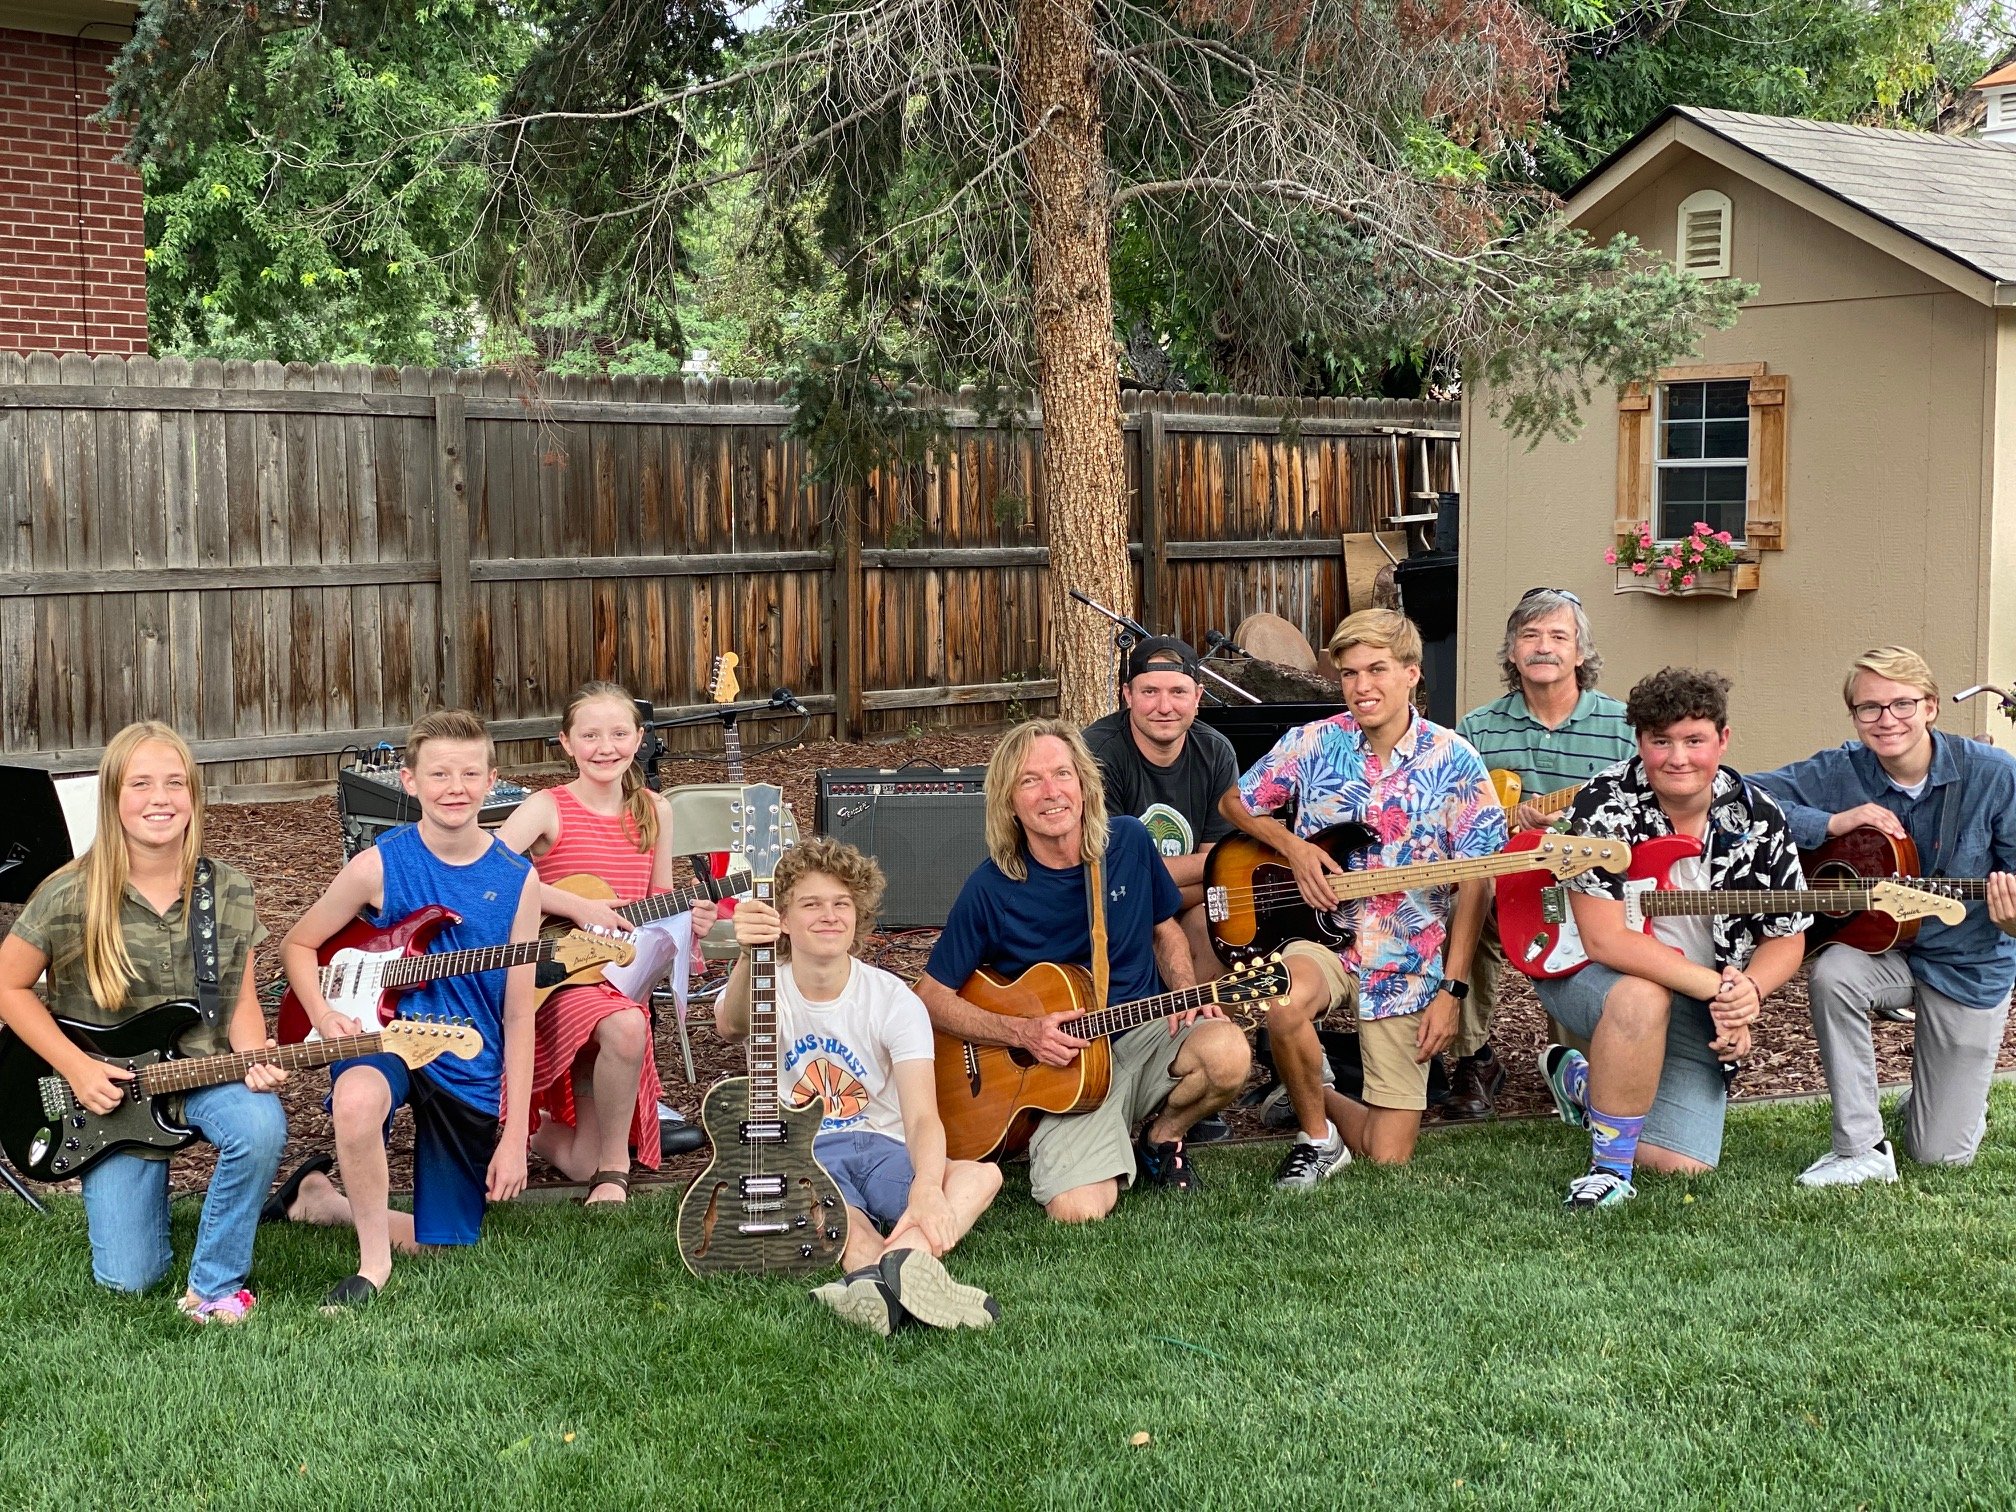    Guitar students gathered in back yard with instruments after performance.   